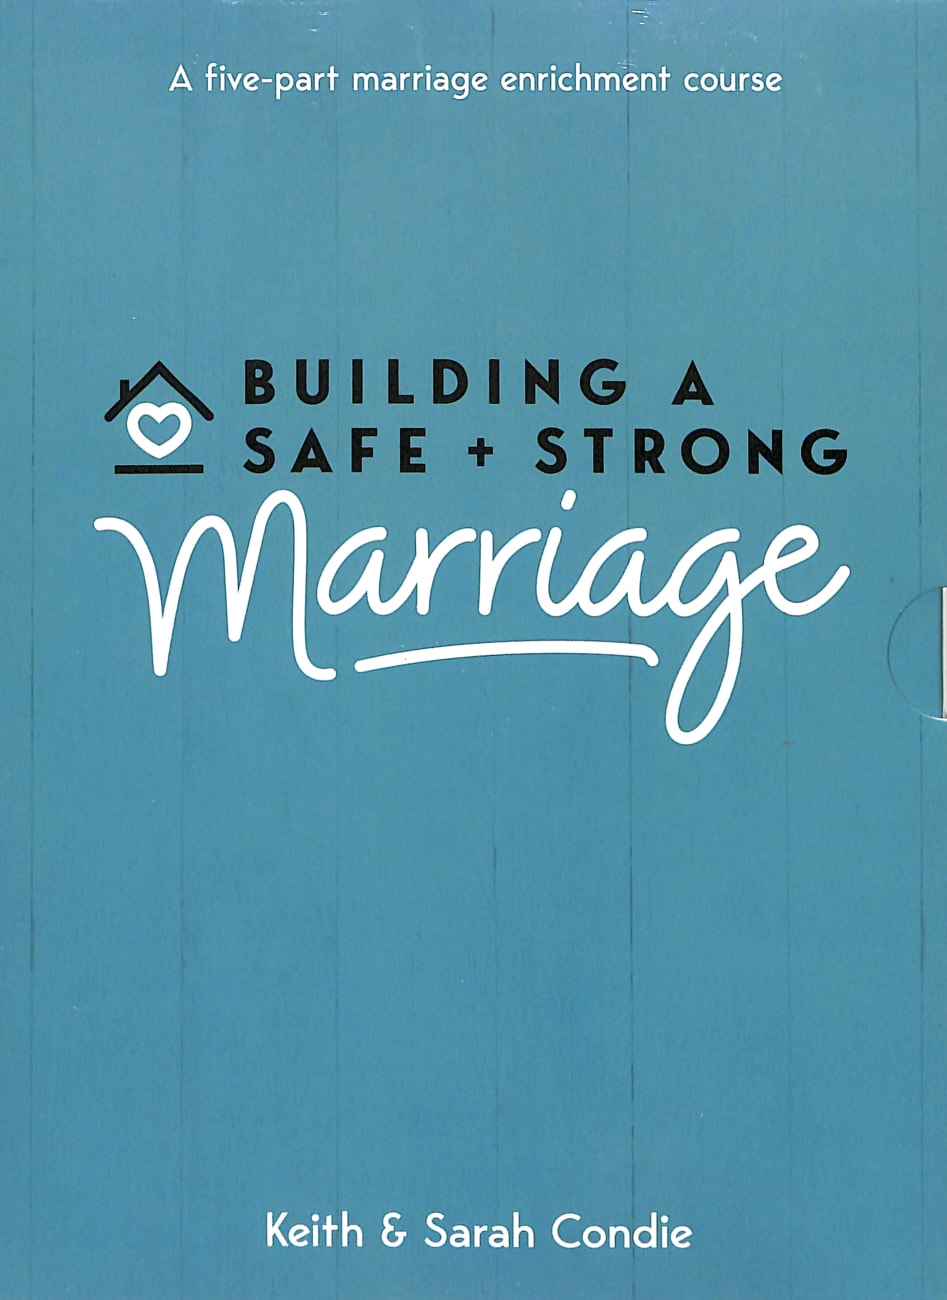 Building a Safe and Strong Marriage DVD: A Five Part Marriage Enrichment Course DVD